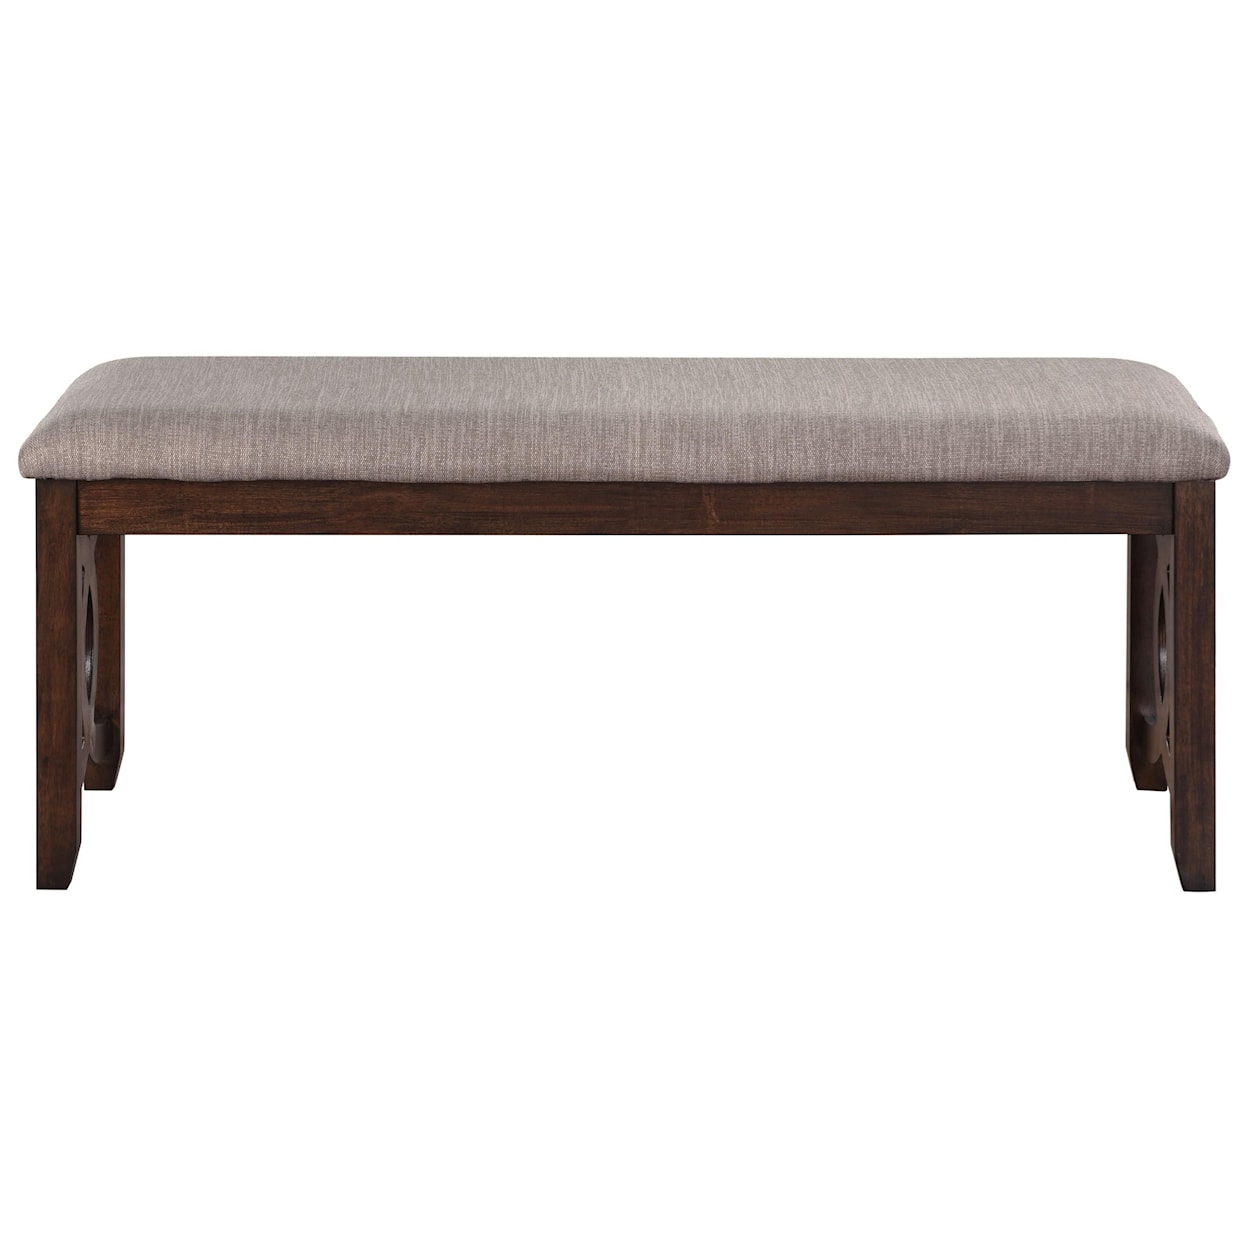 New Classic Gia Dining Bench